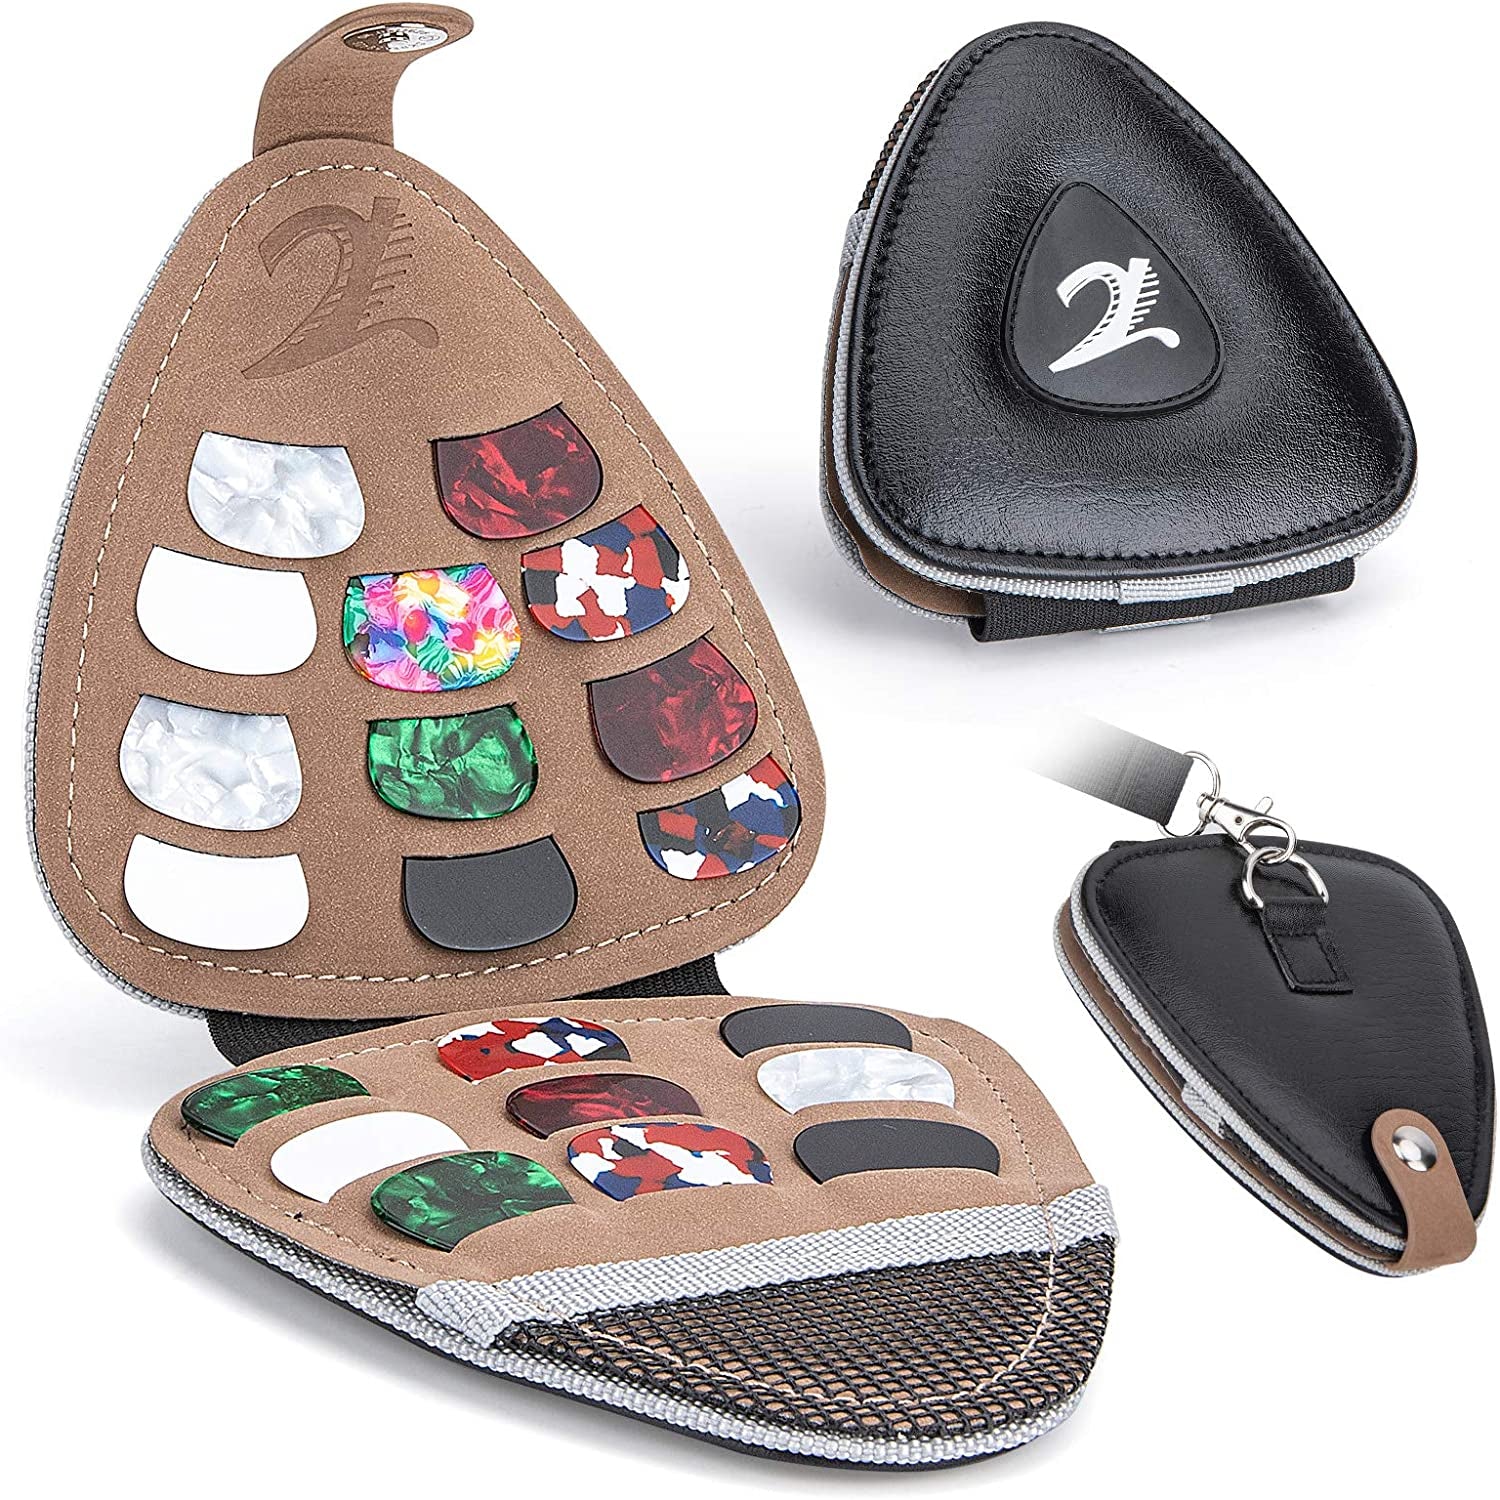 Guitar Picks Holder for Acoustic Electric Guitar, Variety Pack Picks Storage Pouch Box, PU Leather Plectrums Bag with Lanyard, Gift for Guitar Players ( Case Only )